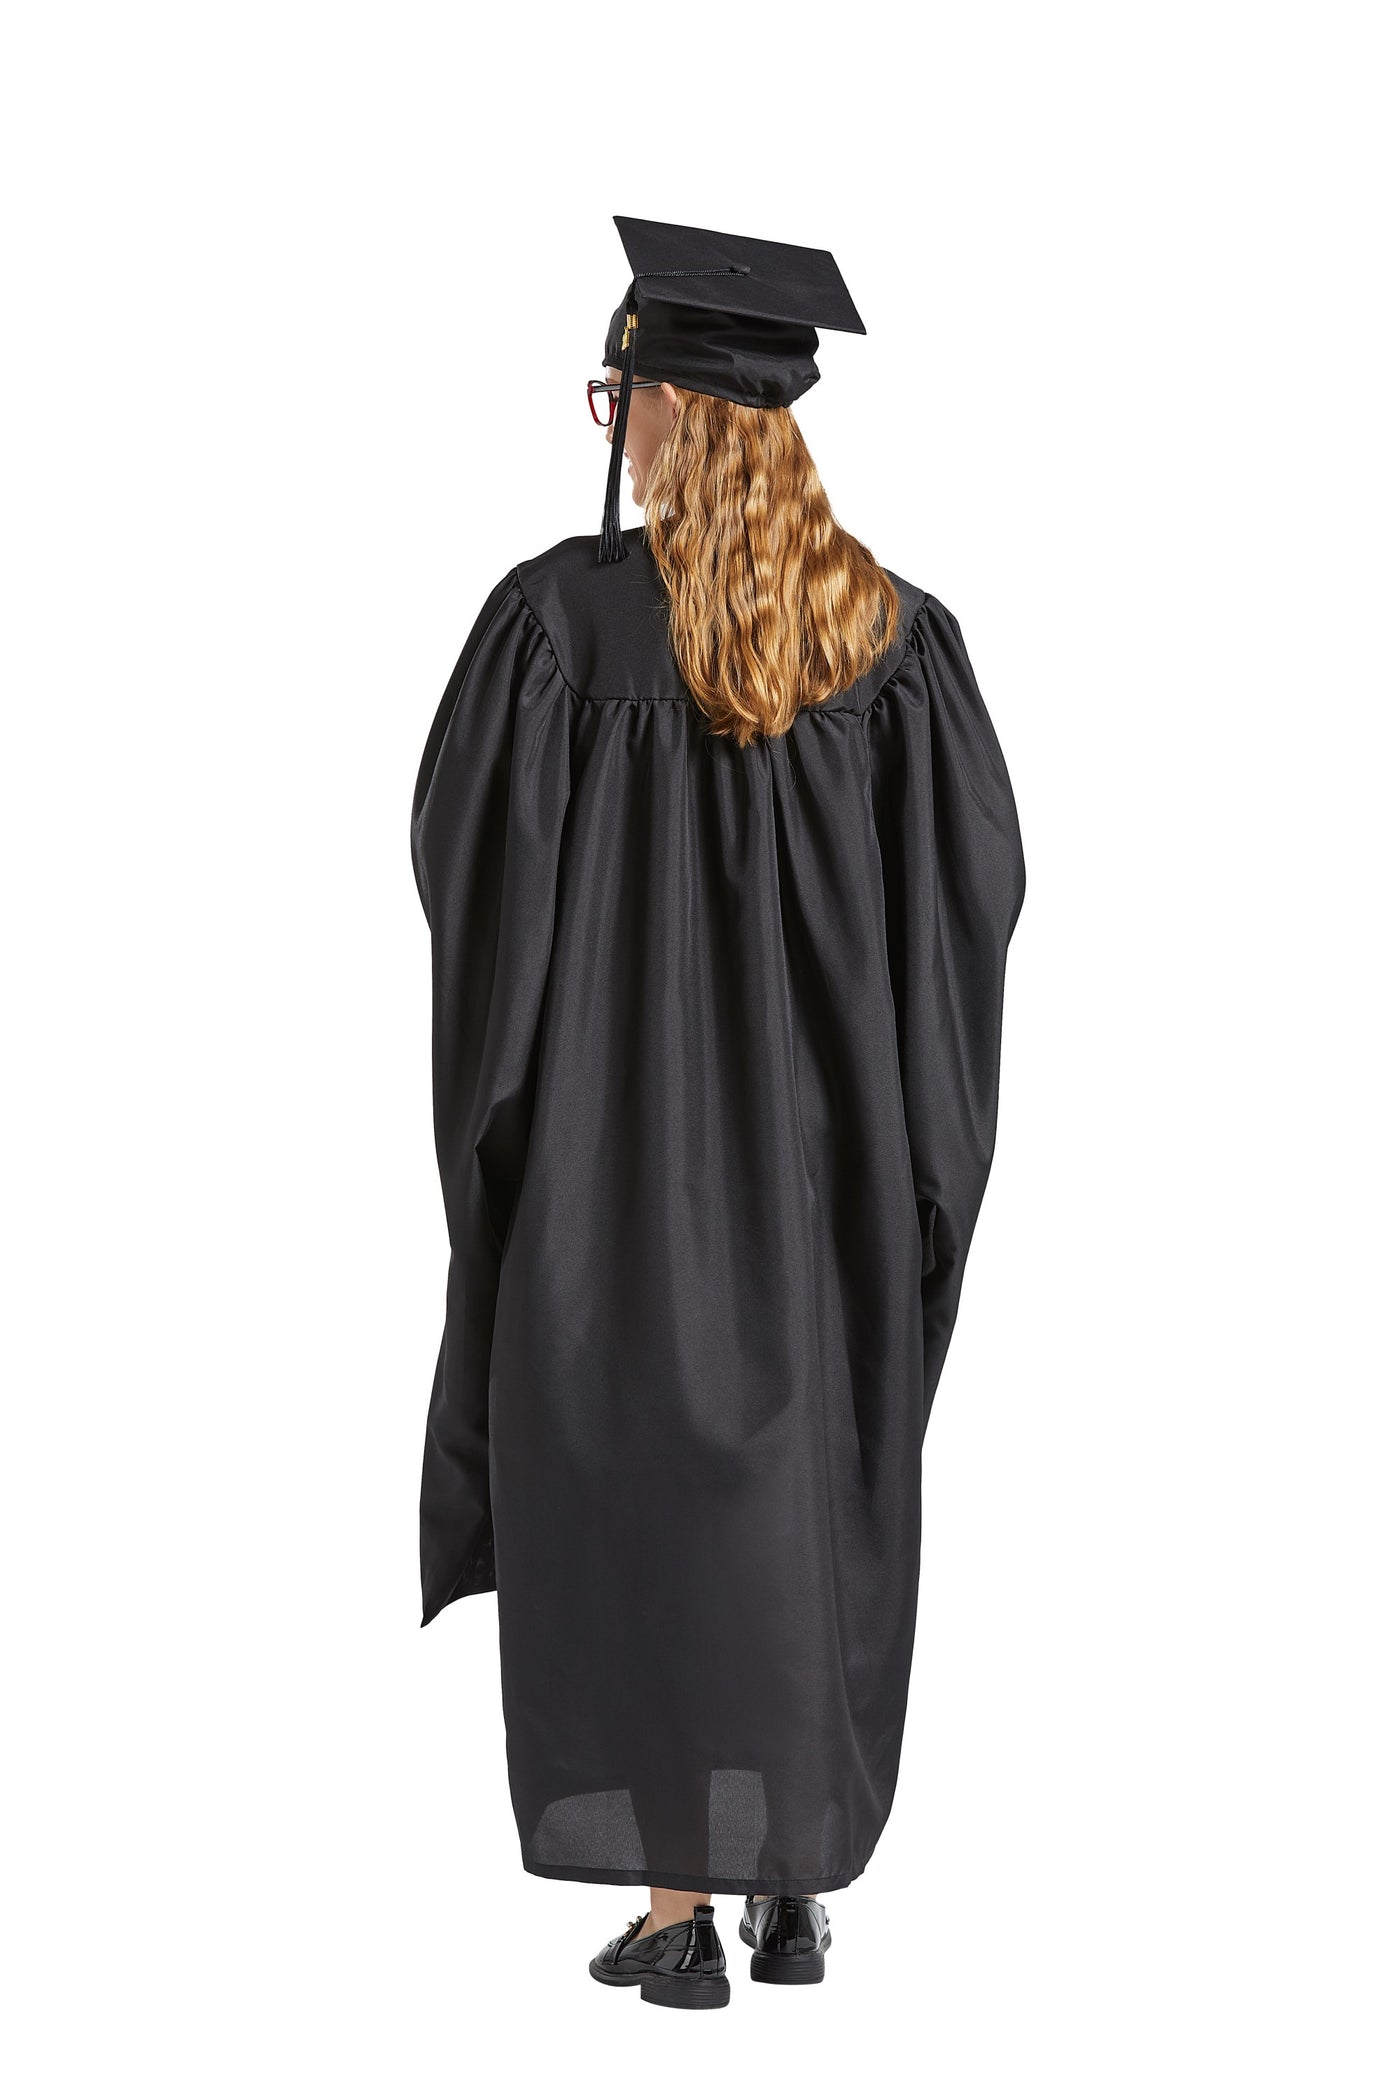 2023&2022 Graduation Master Cap and Gown Set